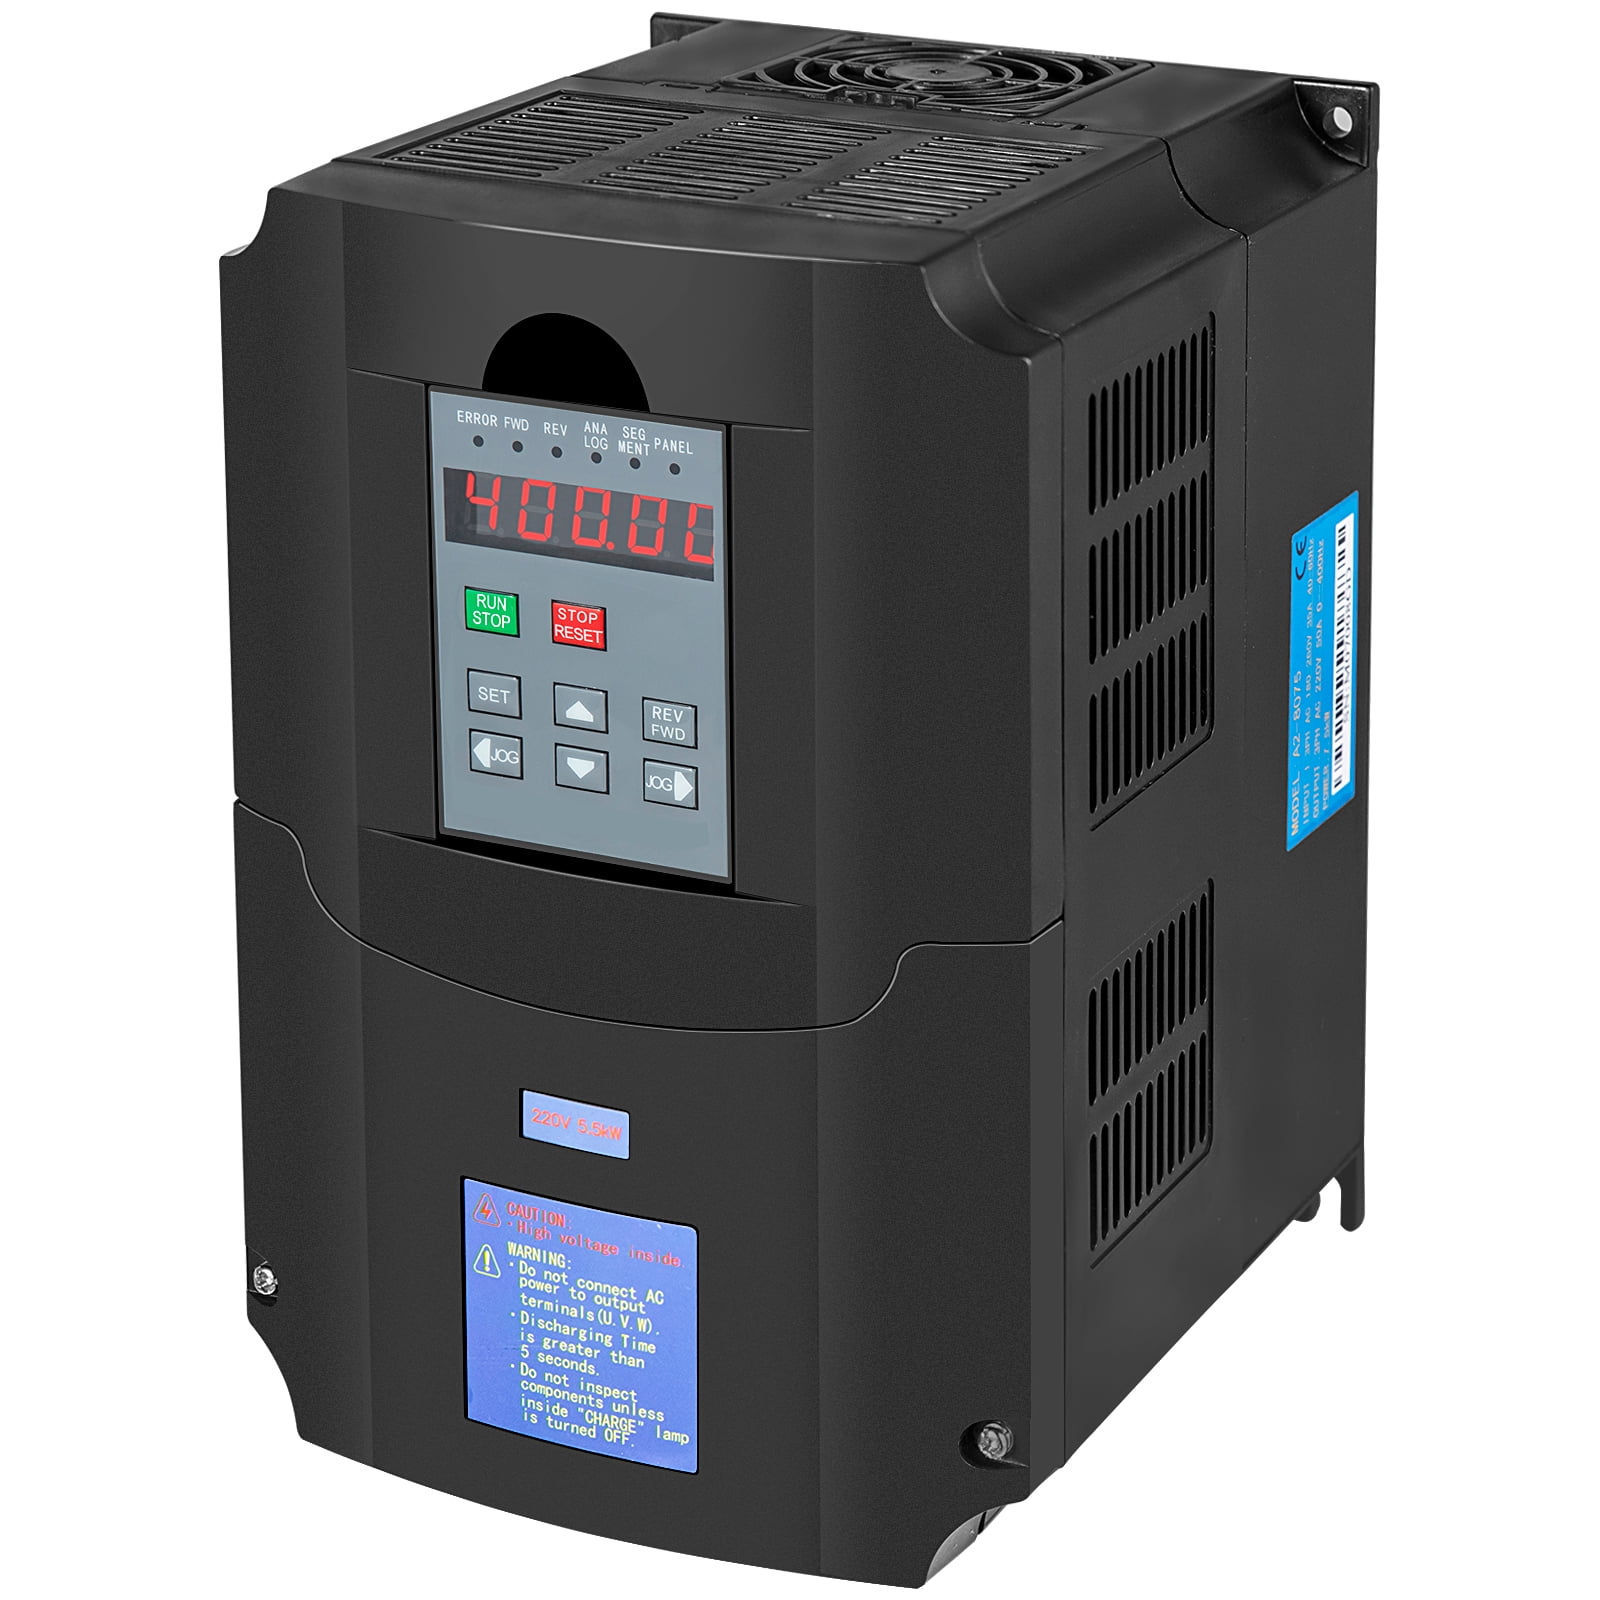 110V 3KW 13A VARIABLE FREQUENCY DRIVE INVERTER VFD 4HP  HY FOR CNC SPEED CONTROL 